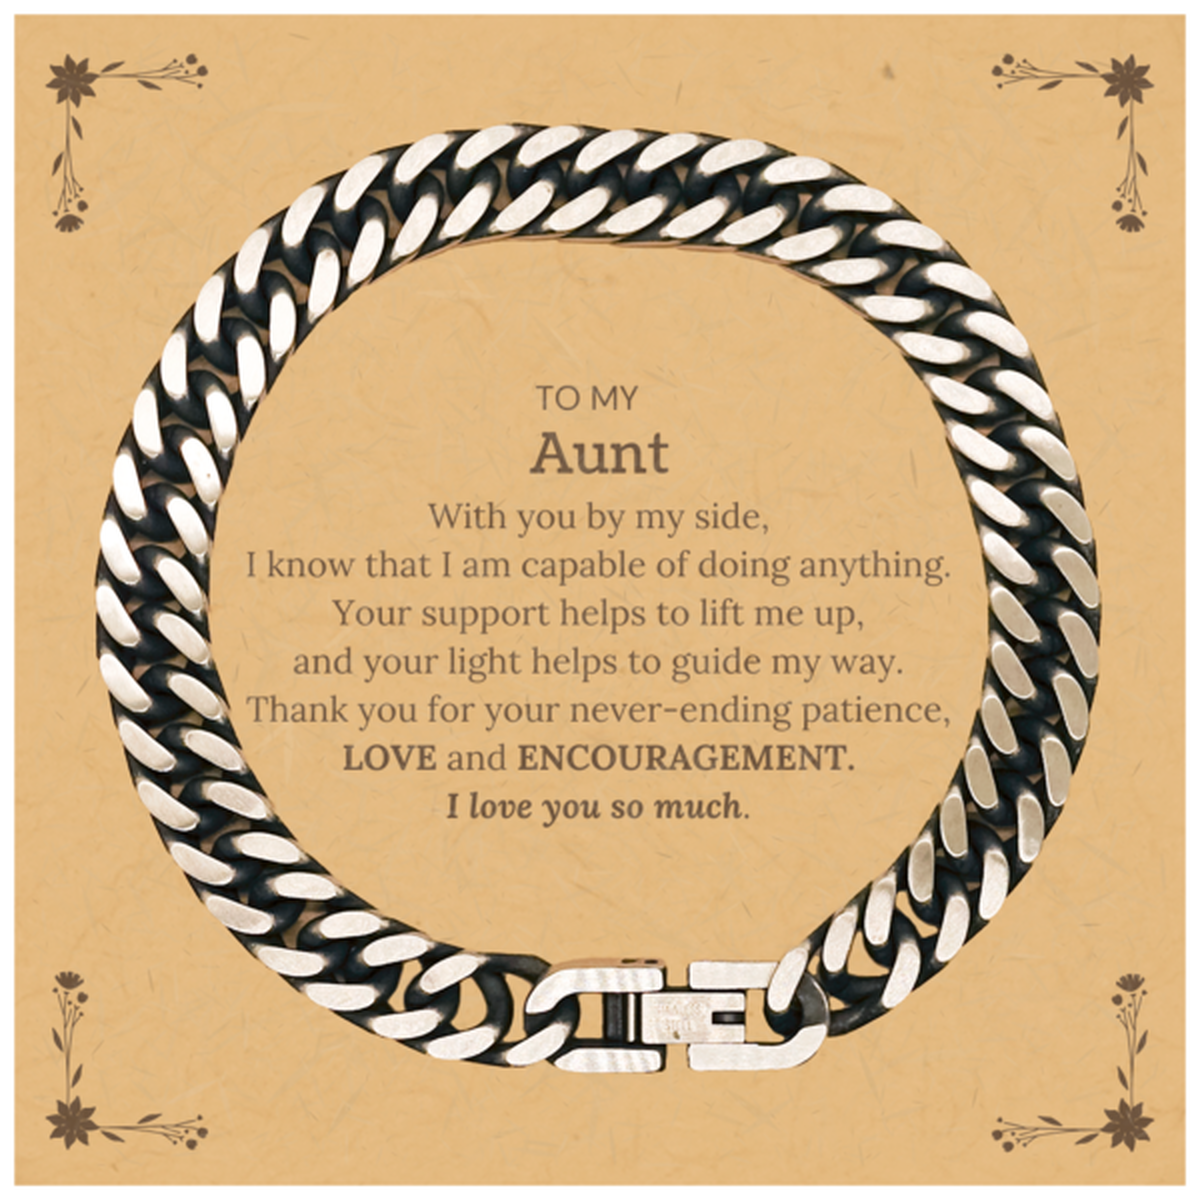 Appreciation Aunt Cuban Link Chain Bracelet Gifts, To My Aunt Birthday Christmas Wedding Keepsake Gifts for Aunt With you by my side, I know that I am capable of doing anything. I love you so much